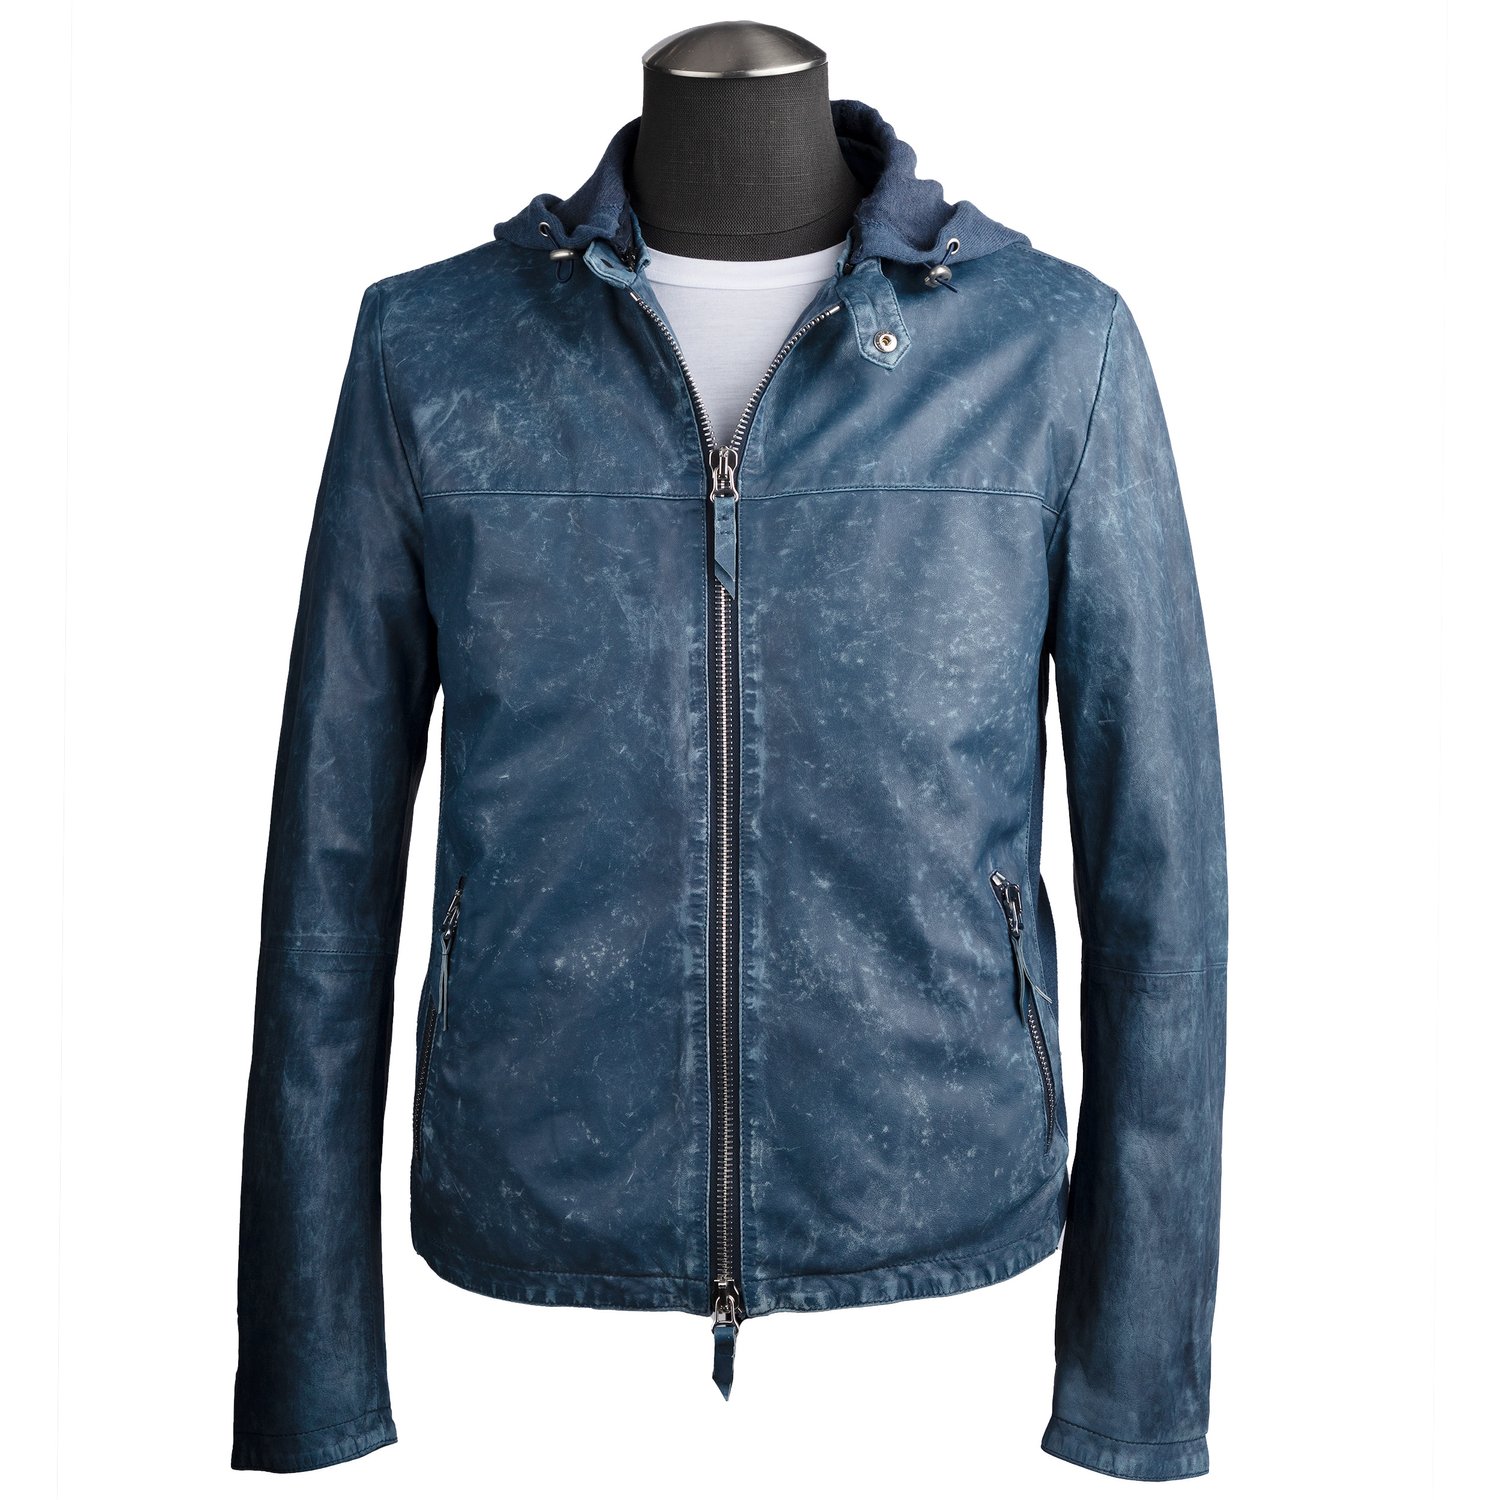 Necessities Privilegium femte Gimo's Washed Leather Jacket in Light Blue with Removable Hoodie — Uomo San  Francisco | Luxury European Menswear